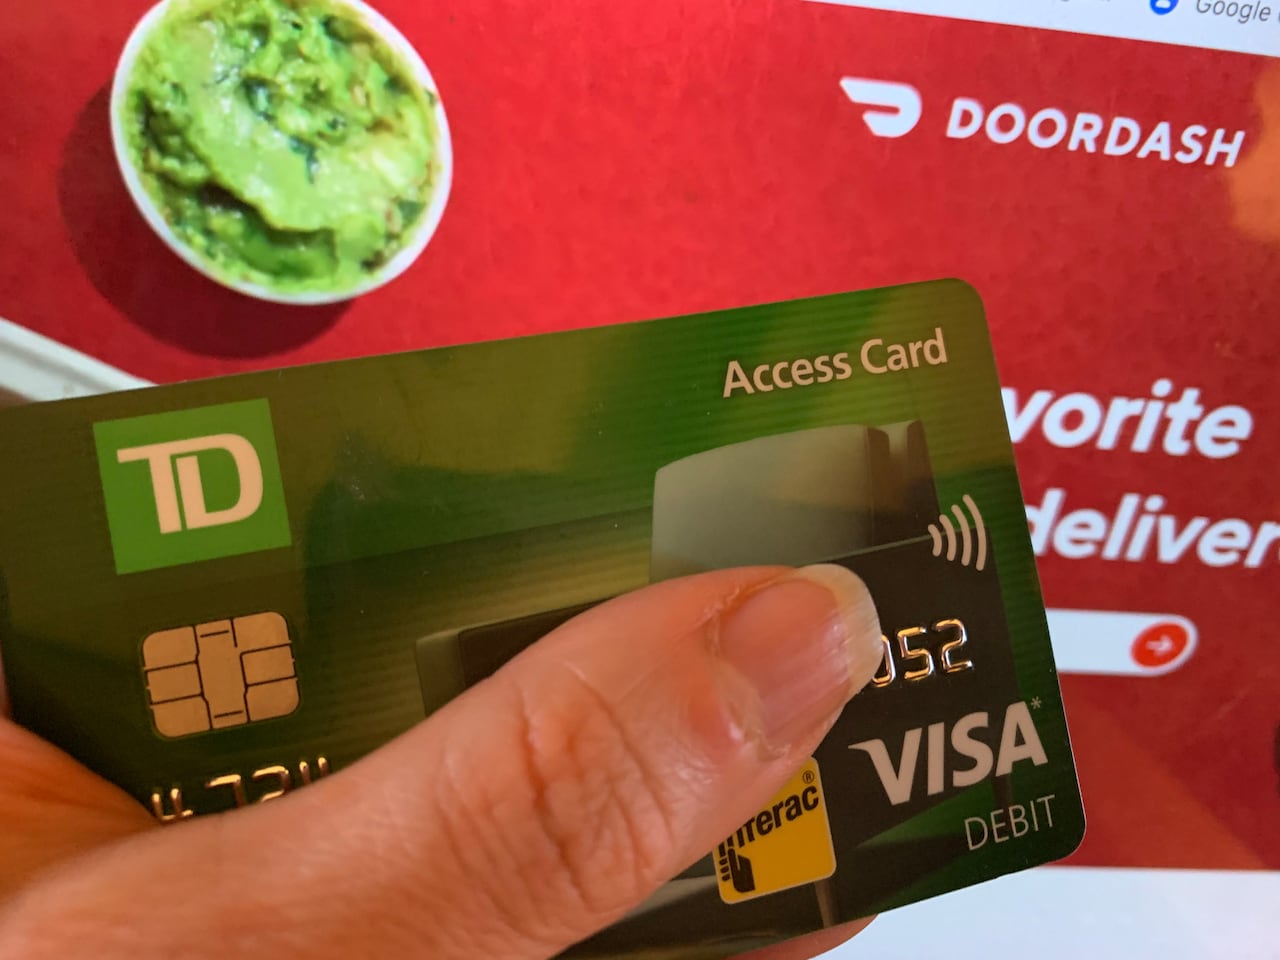 Read more about the article Does Doordash Accept Visa Gift Cards<span class="rmp-archive-results-widget "><i class=" rmp-icon rmp-icon--ratings rmp-icon--star rmp-icon--full-highlight"></i><i class=" rmp-icon rmp-icon--ratings rmp-icon--star rmp-icon--full-highlight"></i><i class=" rmp-icon rmp-icon--ratings rmp-icon--star rmp-icon--full-highlight"></i><i class=" rmp-icon rmp-icon--ratings rmp-icon--star rmp-icon--full-highlight"></i><i class=" rmp-icon rmp-icon--ratings rmp-icon--star rmp-icon--full-highlight"></i> <span>5 (68)</span></span>